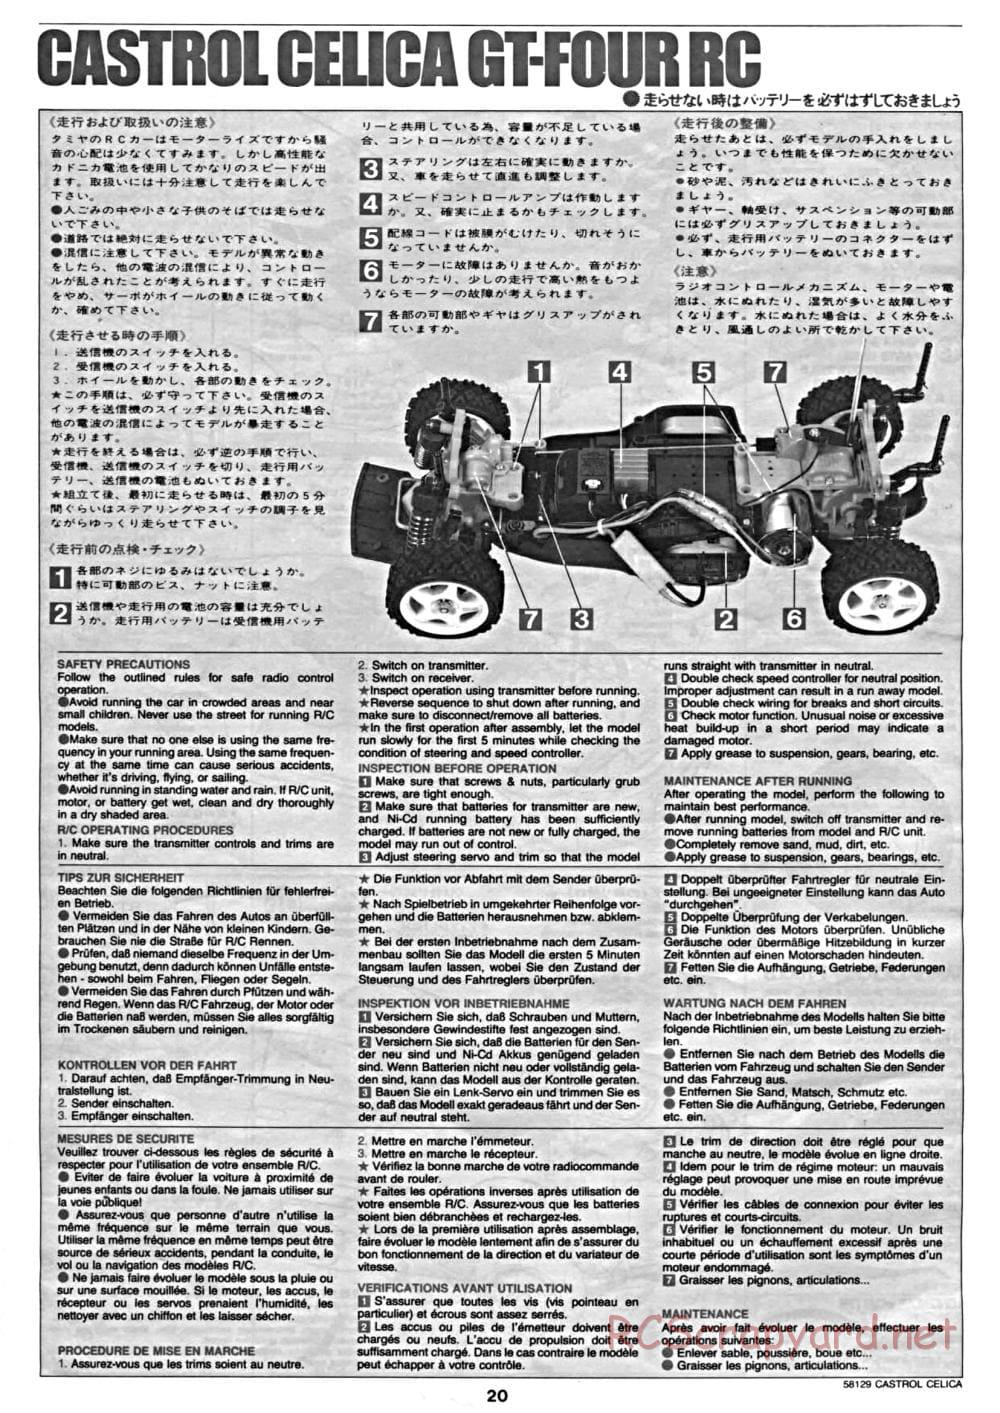 Tamiya - Castrol Celica 93 Monte-Carlo - TA-02 Chassis - Manual - Page 20